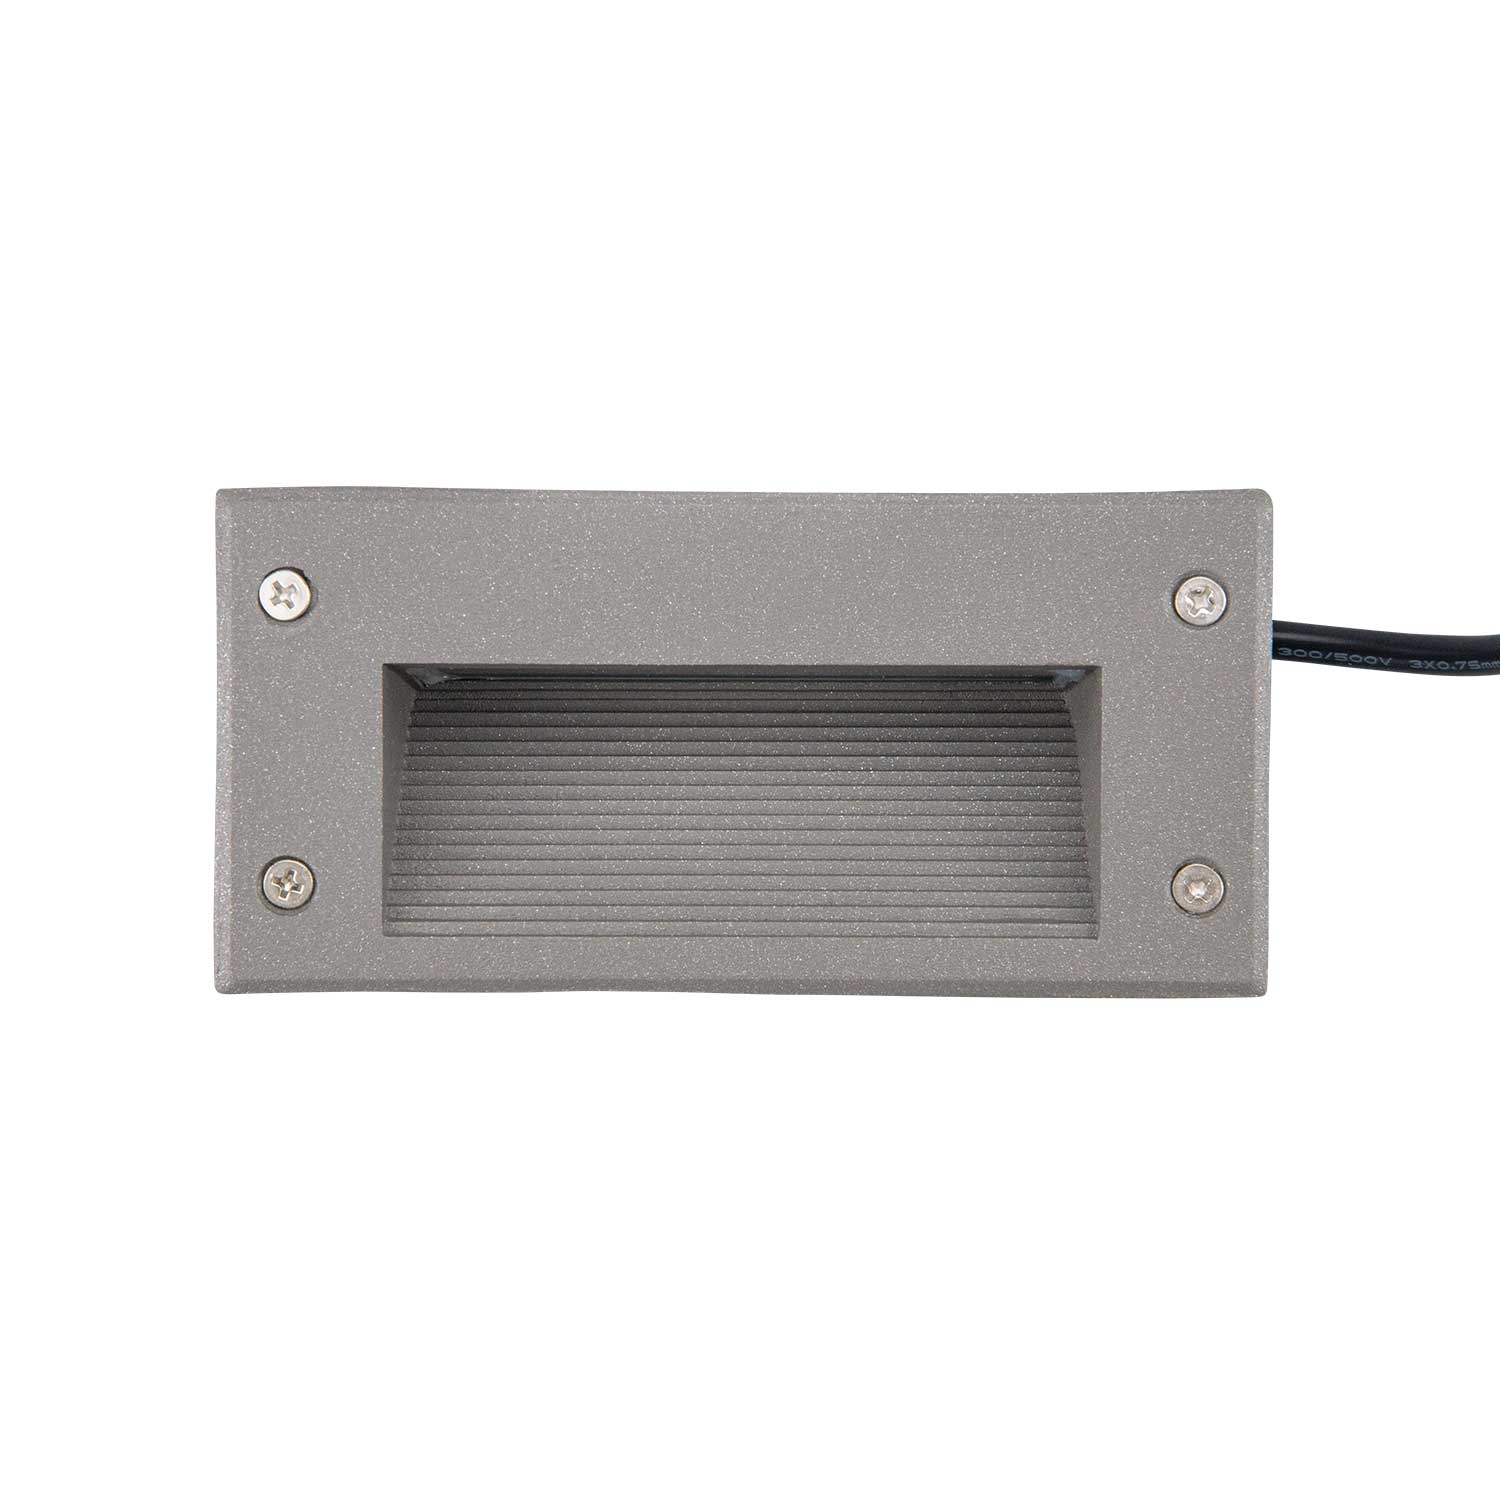 Baliza 3W LED empotrable 4000K exterior gris